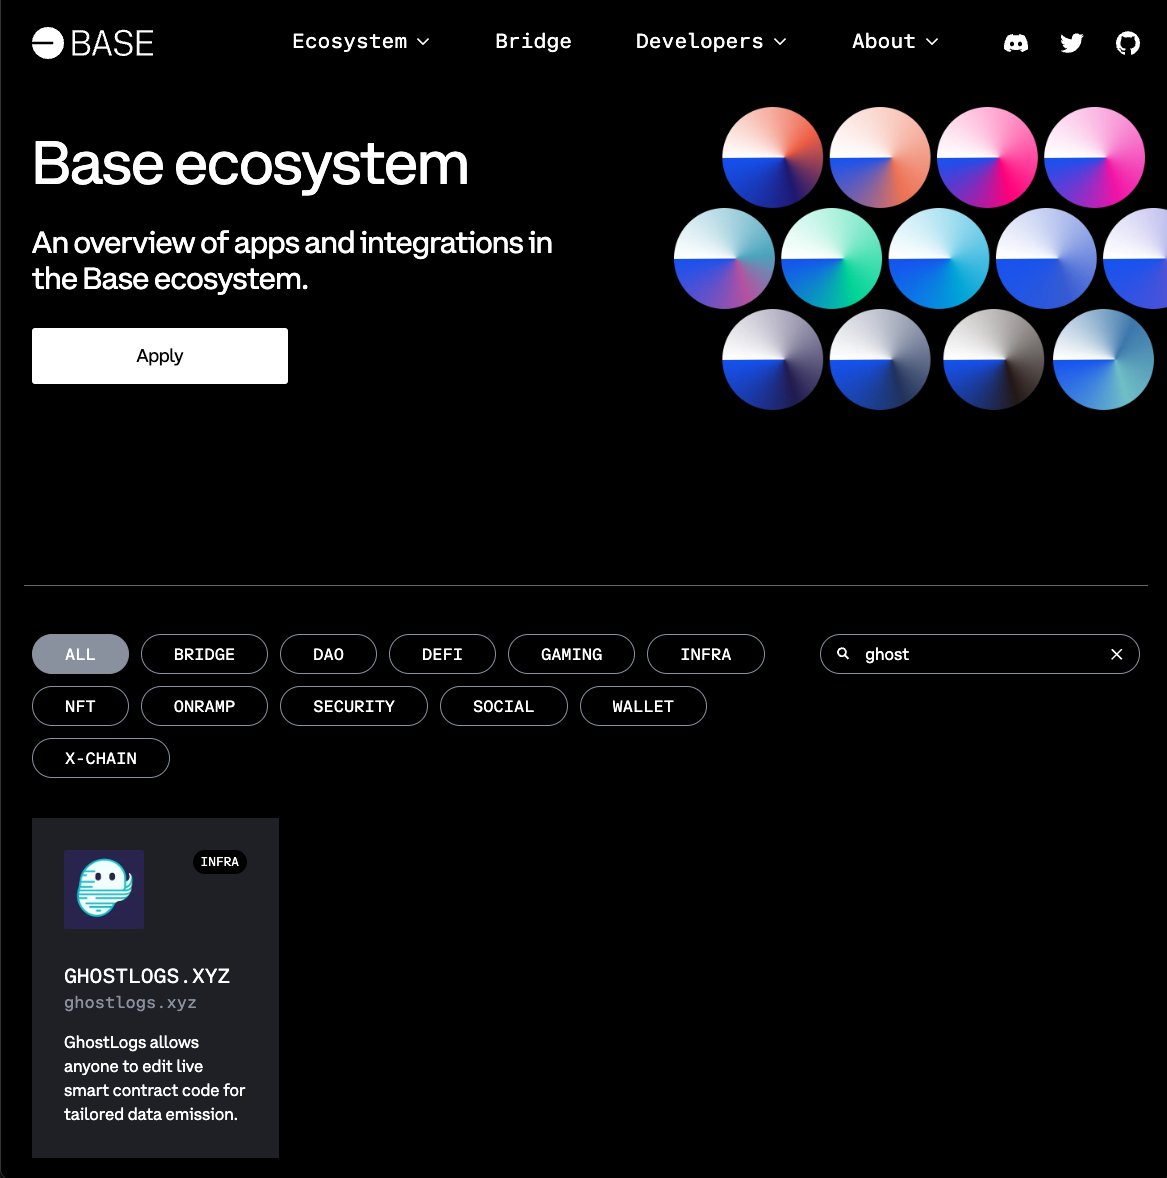 Thank you, @base Thrilled to be a part of the ecosystem🫡